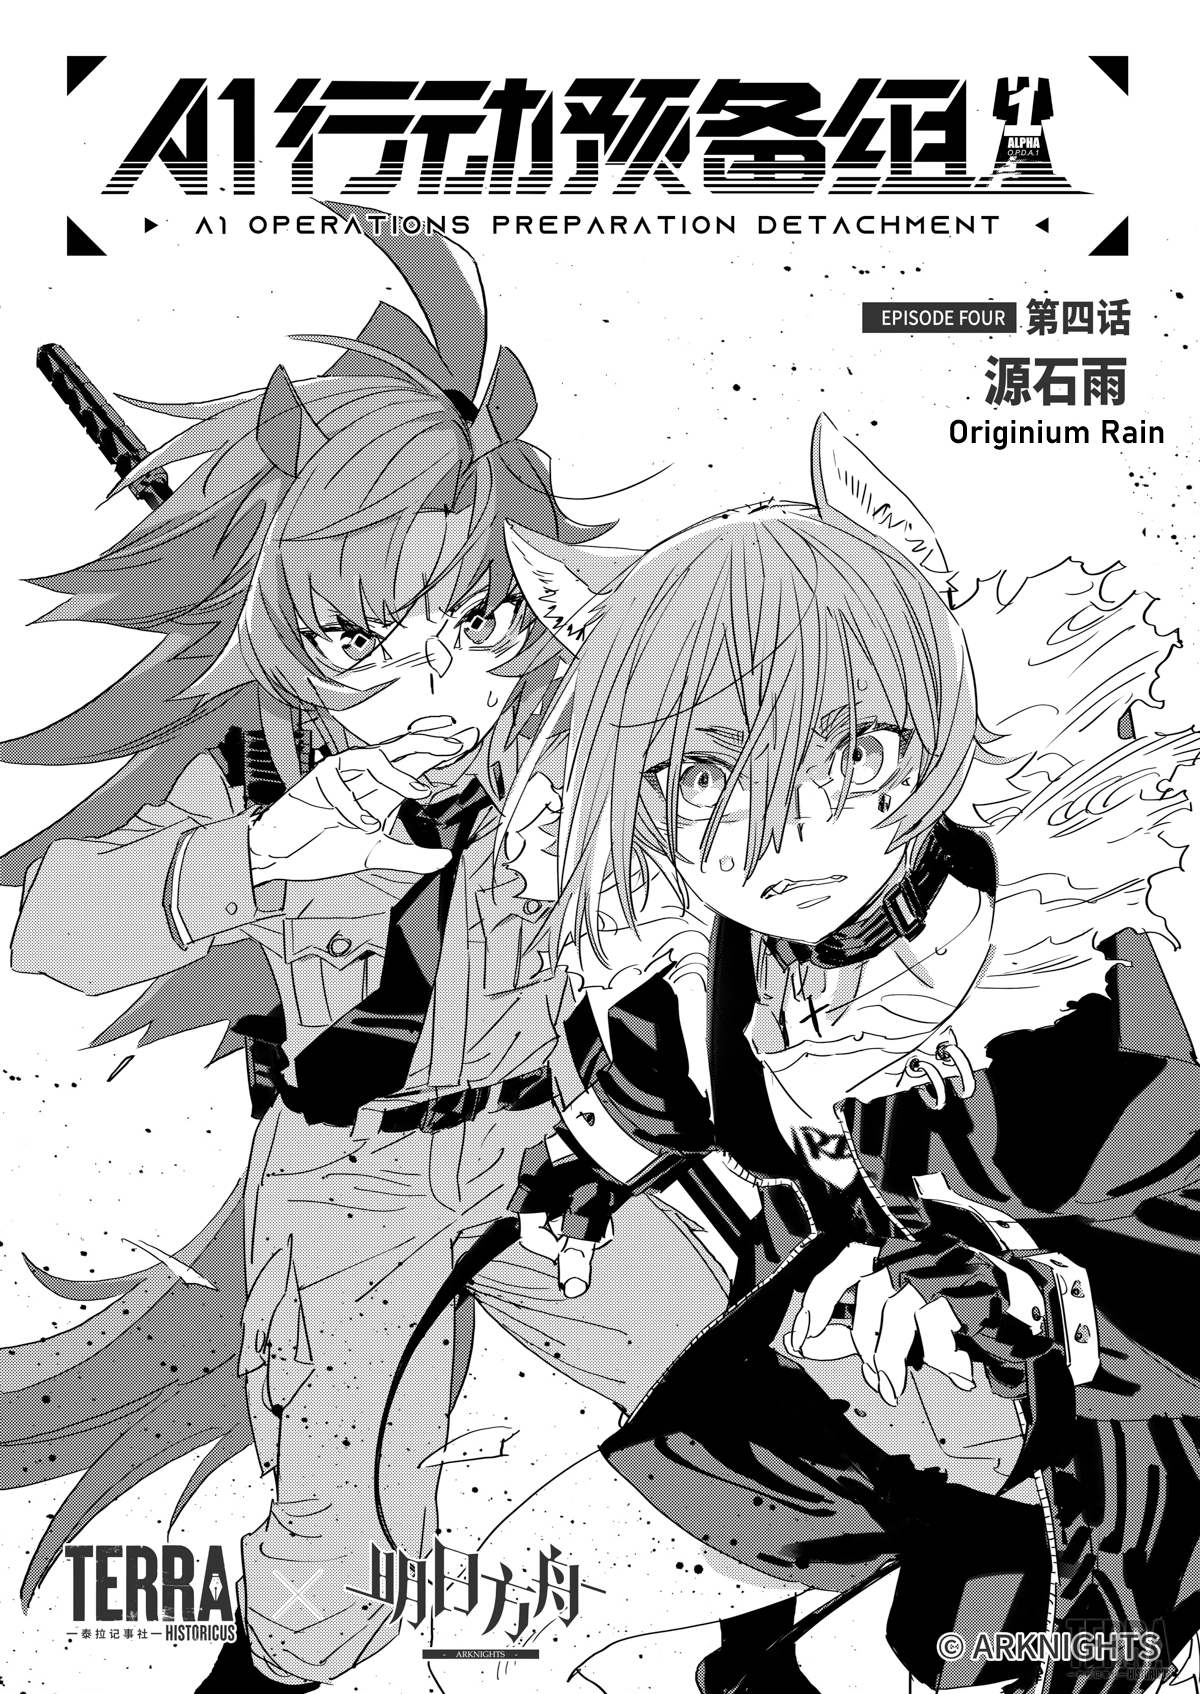 Arknights: A1 Operations Preparation Detachment Chapter 4 #1